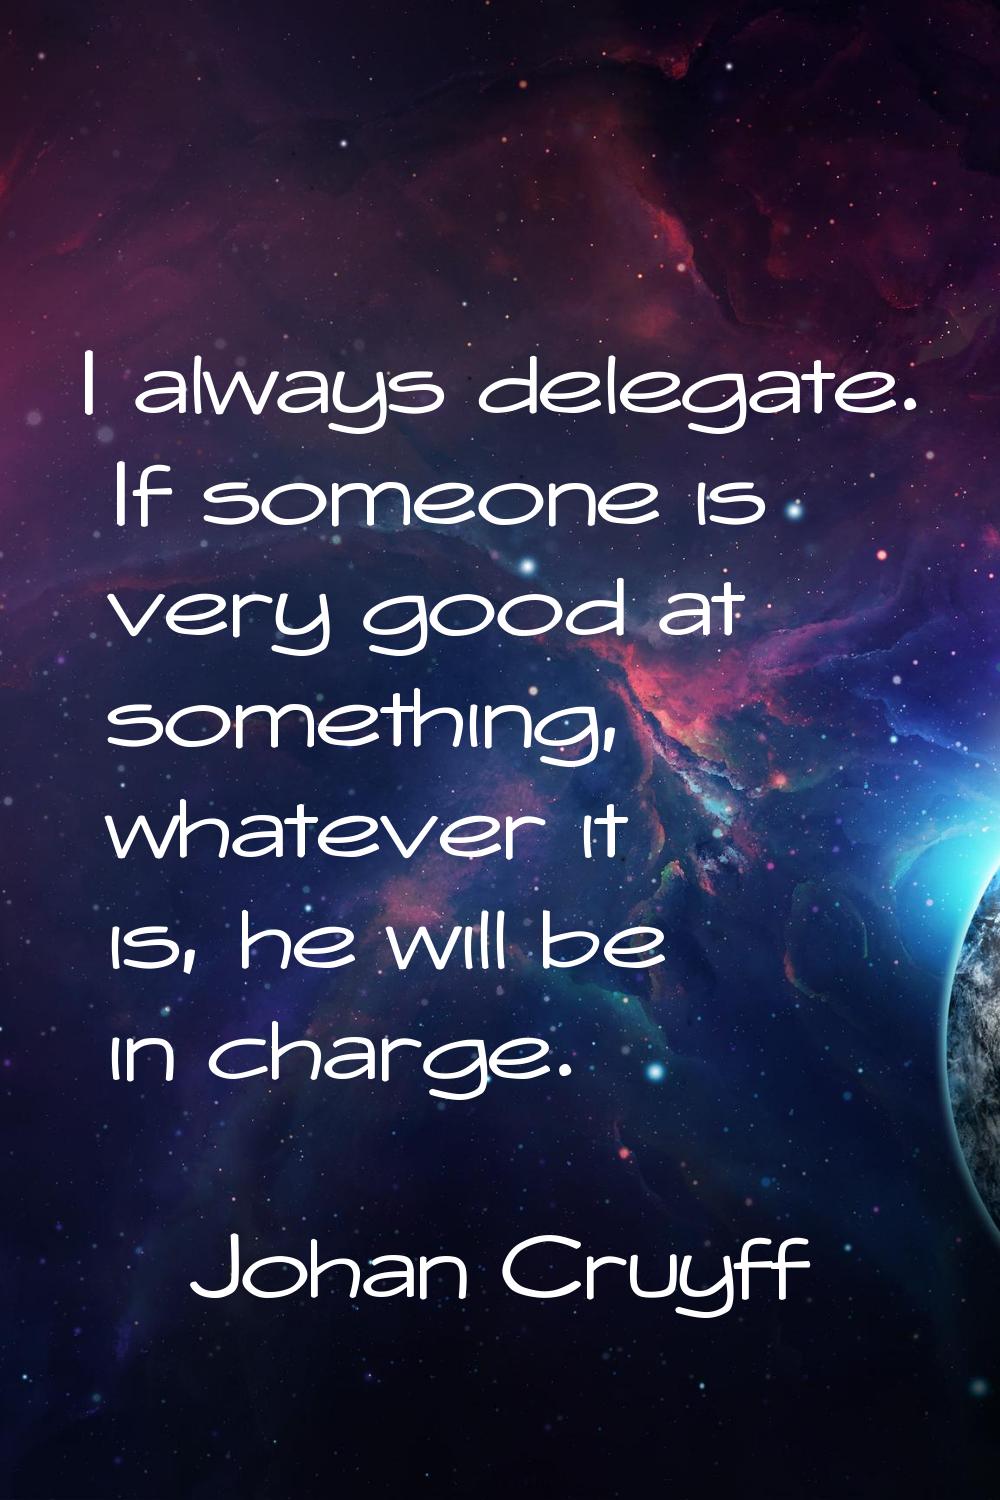 I always delegate. If someone is very good at something, whatever it is, he will be in charge.